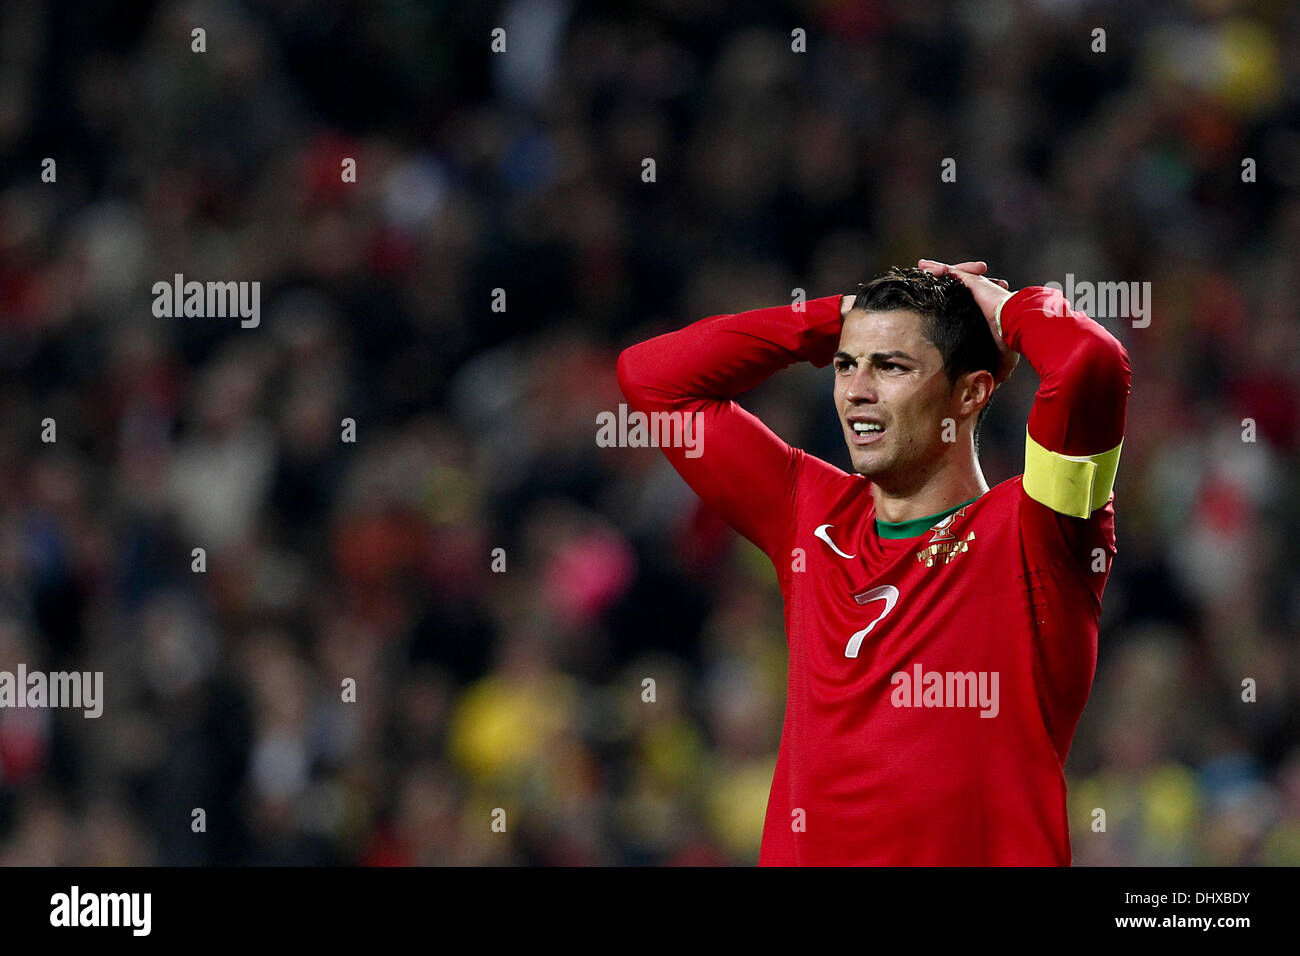 Cristiano Ronaldo, Portugal forward during the soccer match between Portugal and Sewden for the first leg of the Play Off for 2014 FIFA World Cup Brazil, at Luz Stadium in Lisbon, Portugal, on November 15, 2013. Photo by Pedro Nunes Stock Photo